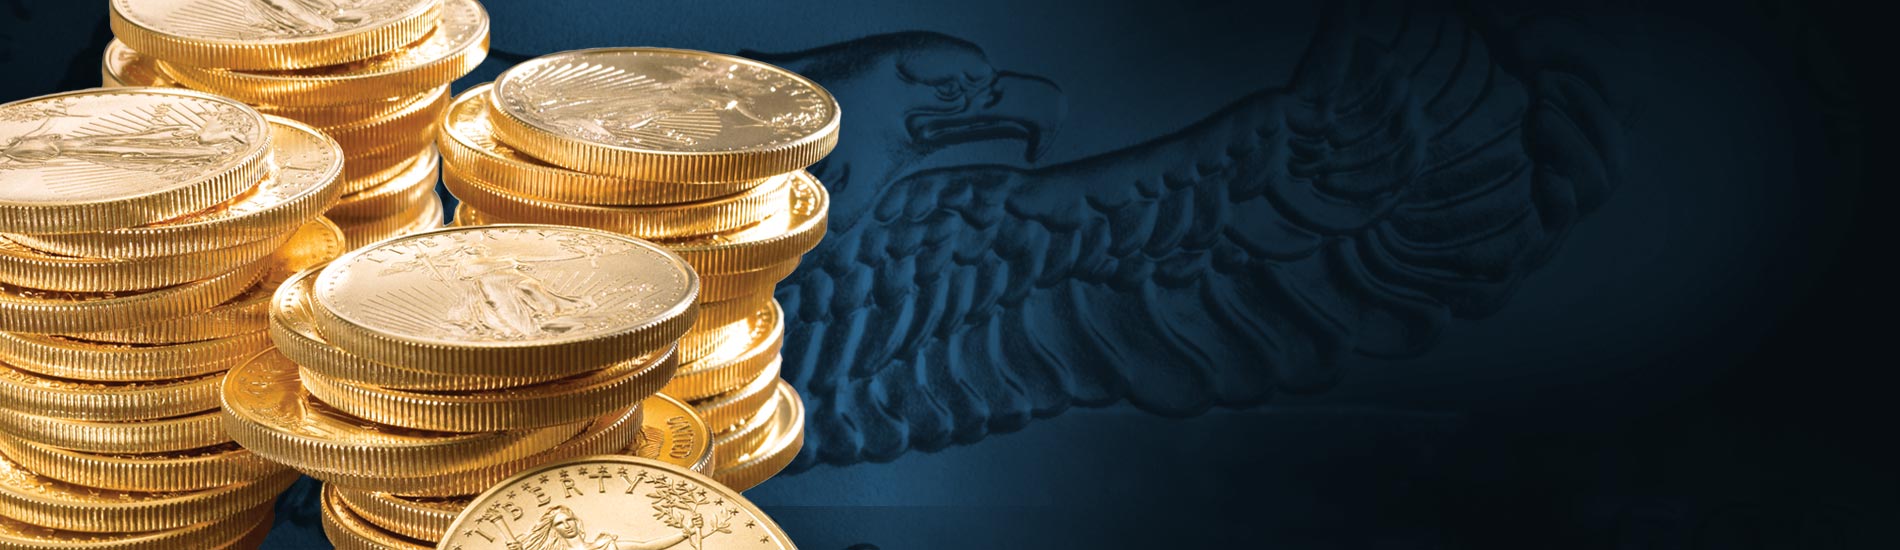 Four stacks of gold bullion coins against dark blue background imprinted with an eagle